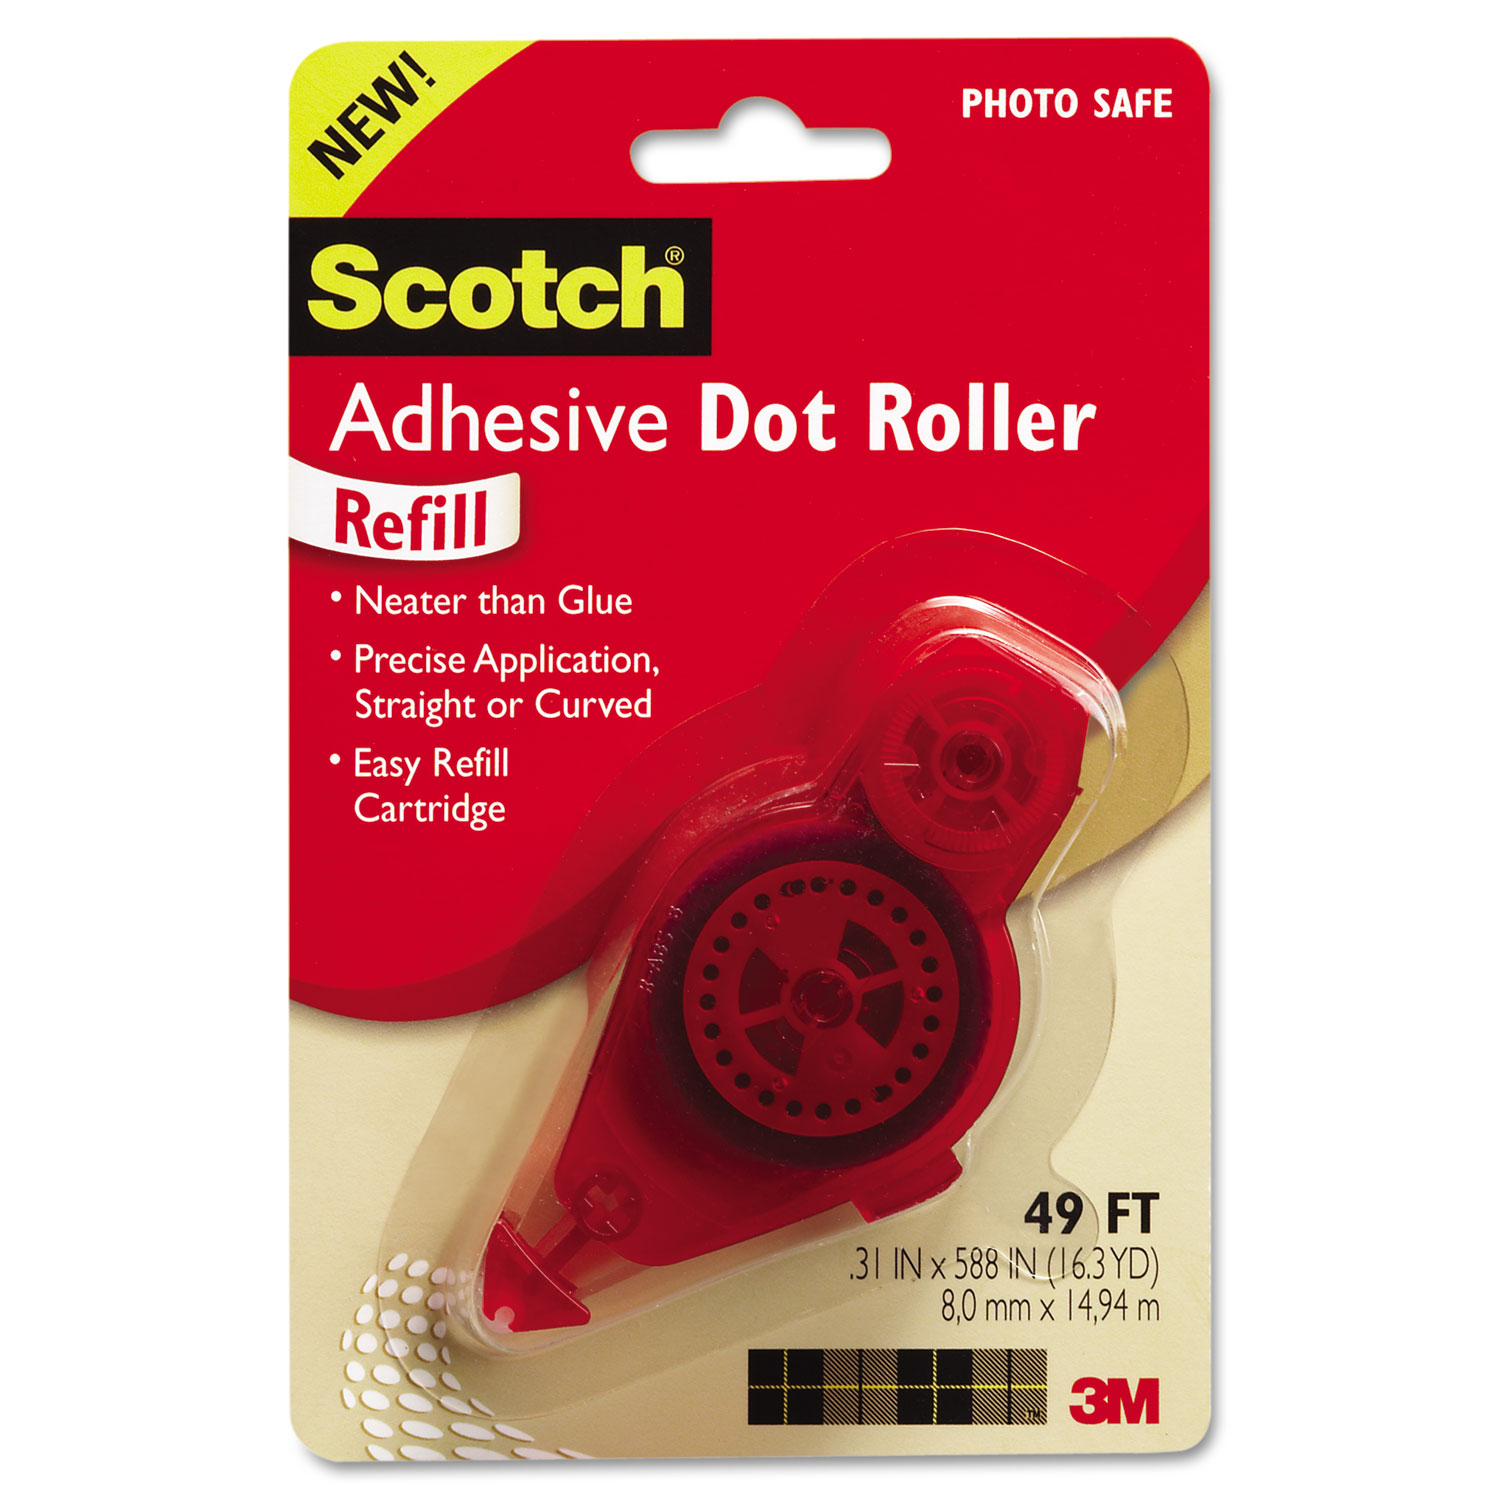  Scotch 6055-R Adhesive Dot Roller Refill, 0.3 x 49 ft, Dries Clear (MMM6055R) 